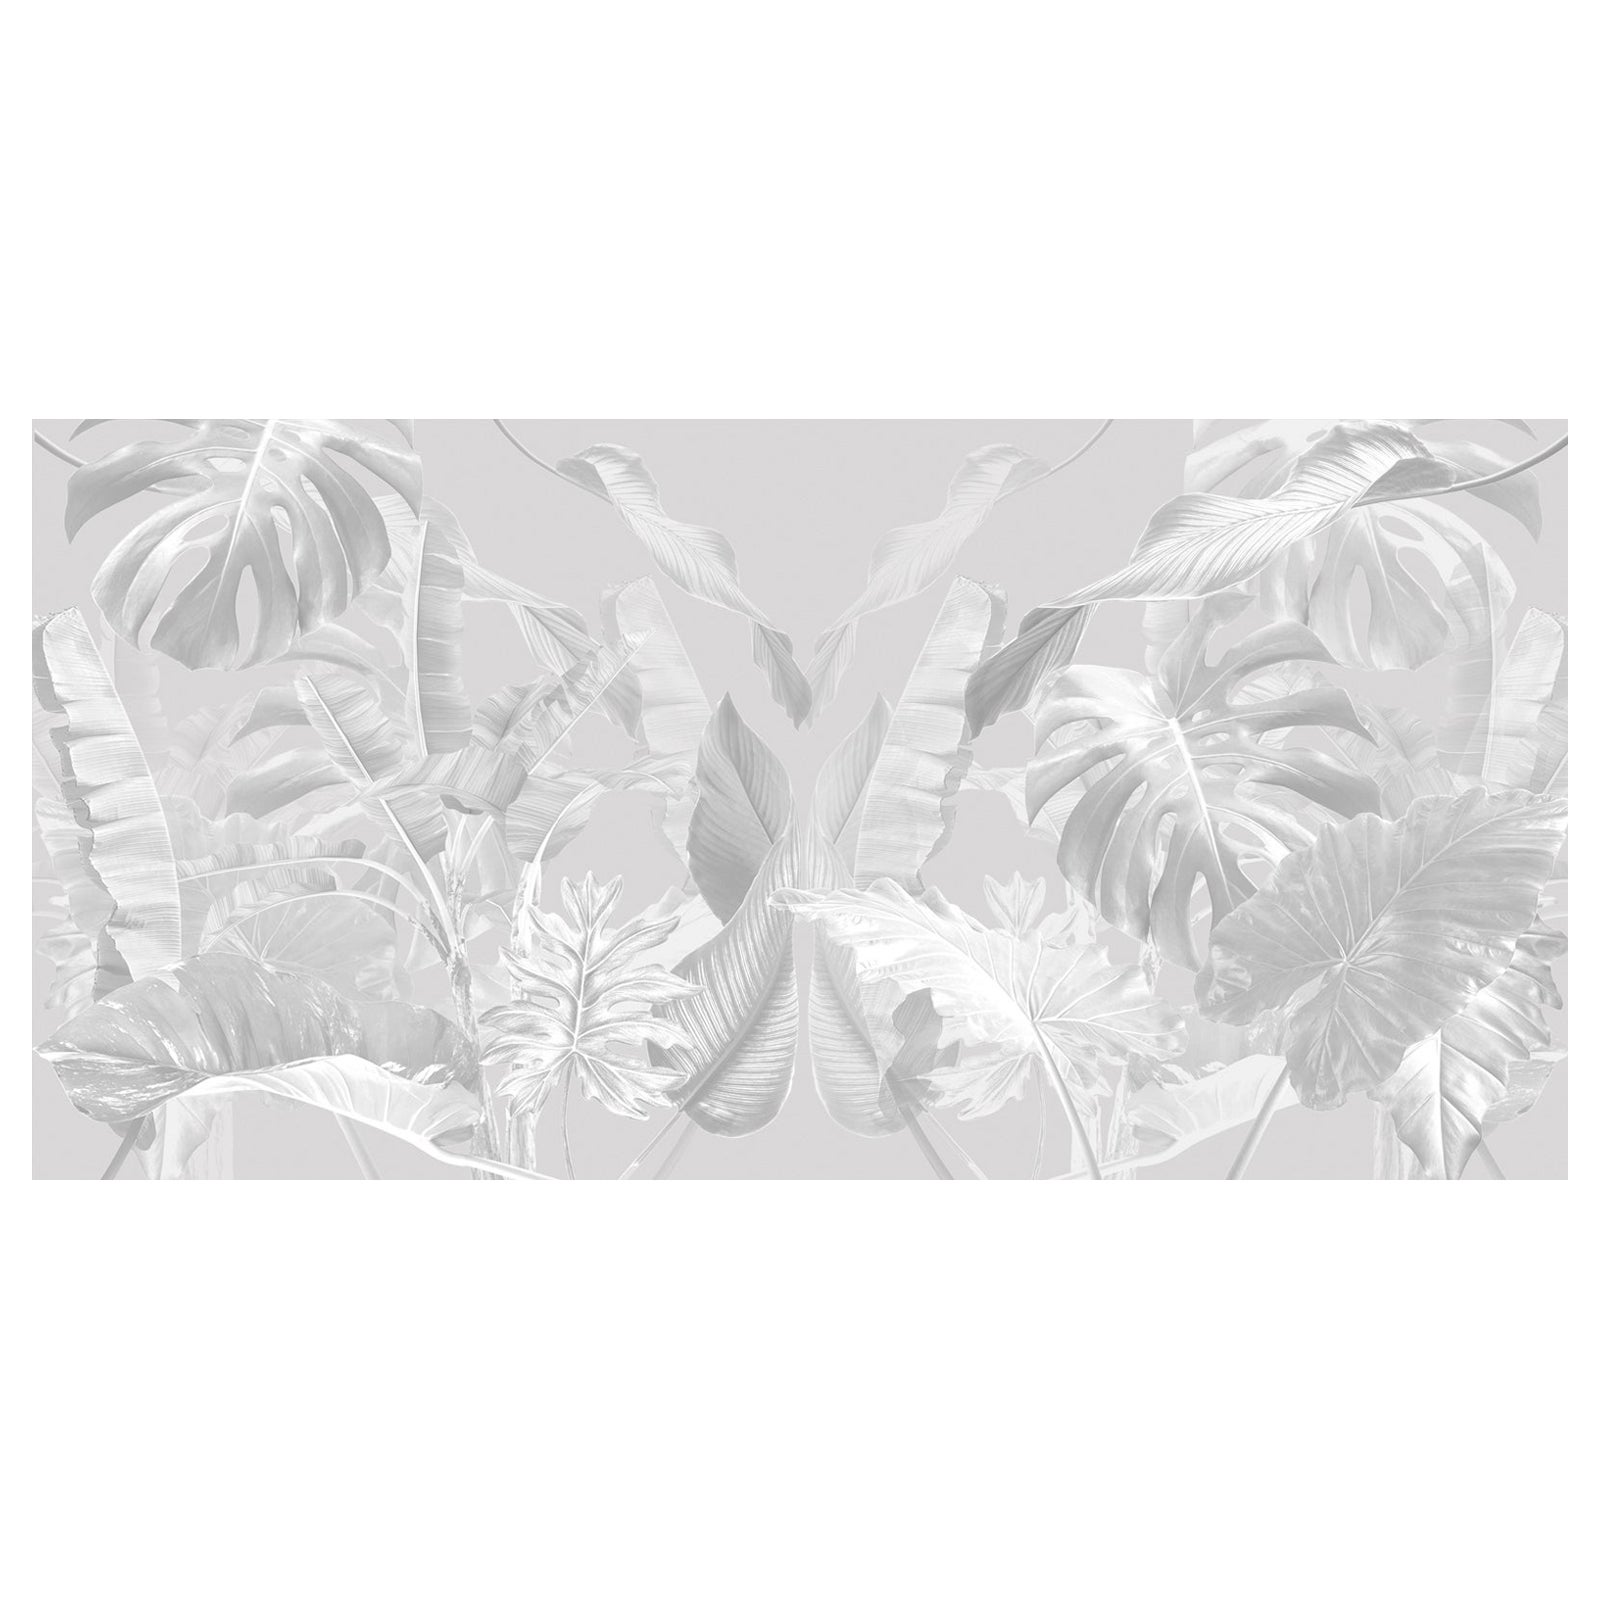 EDGE Collections JungleScape Silver; a whimsical nod to endless Summers